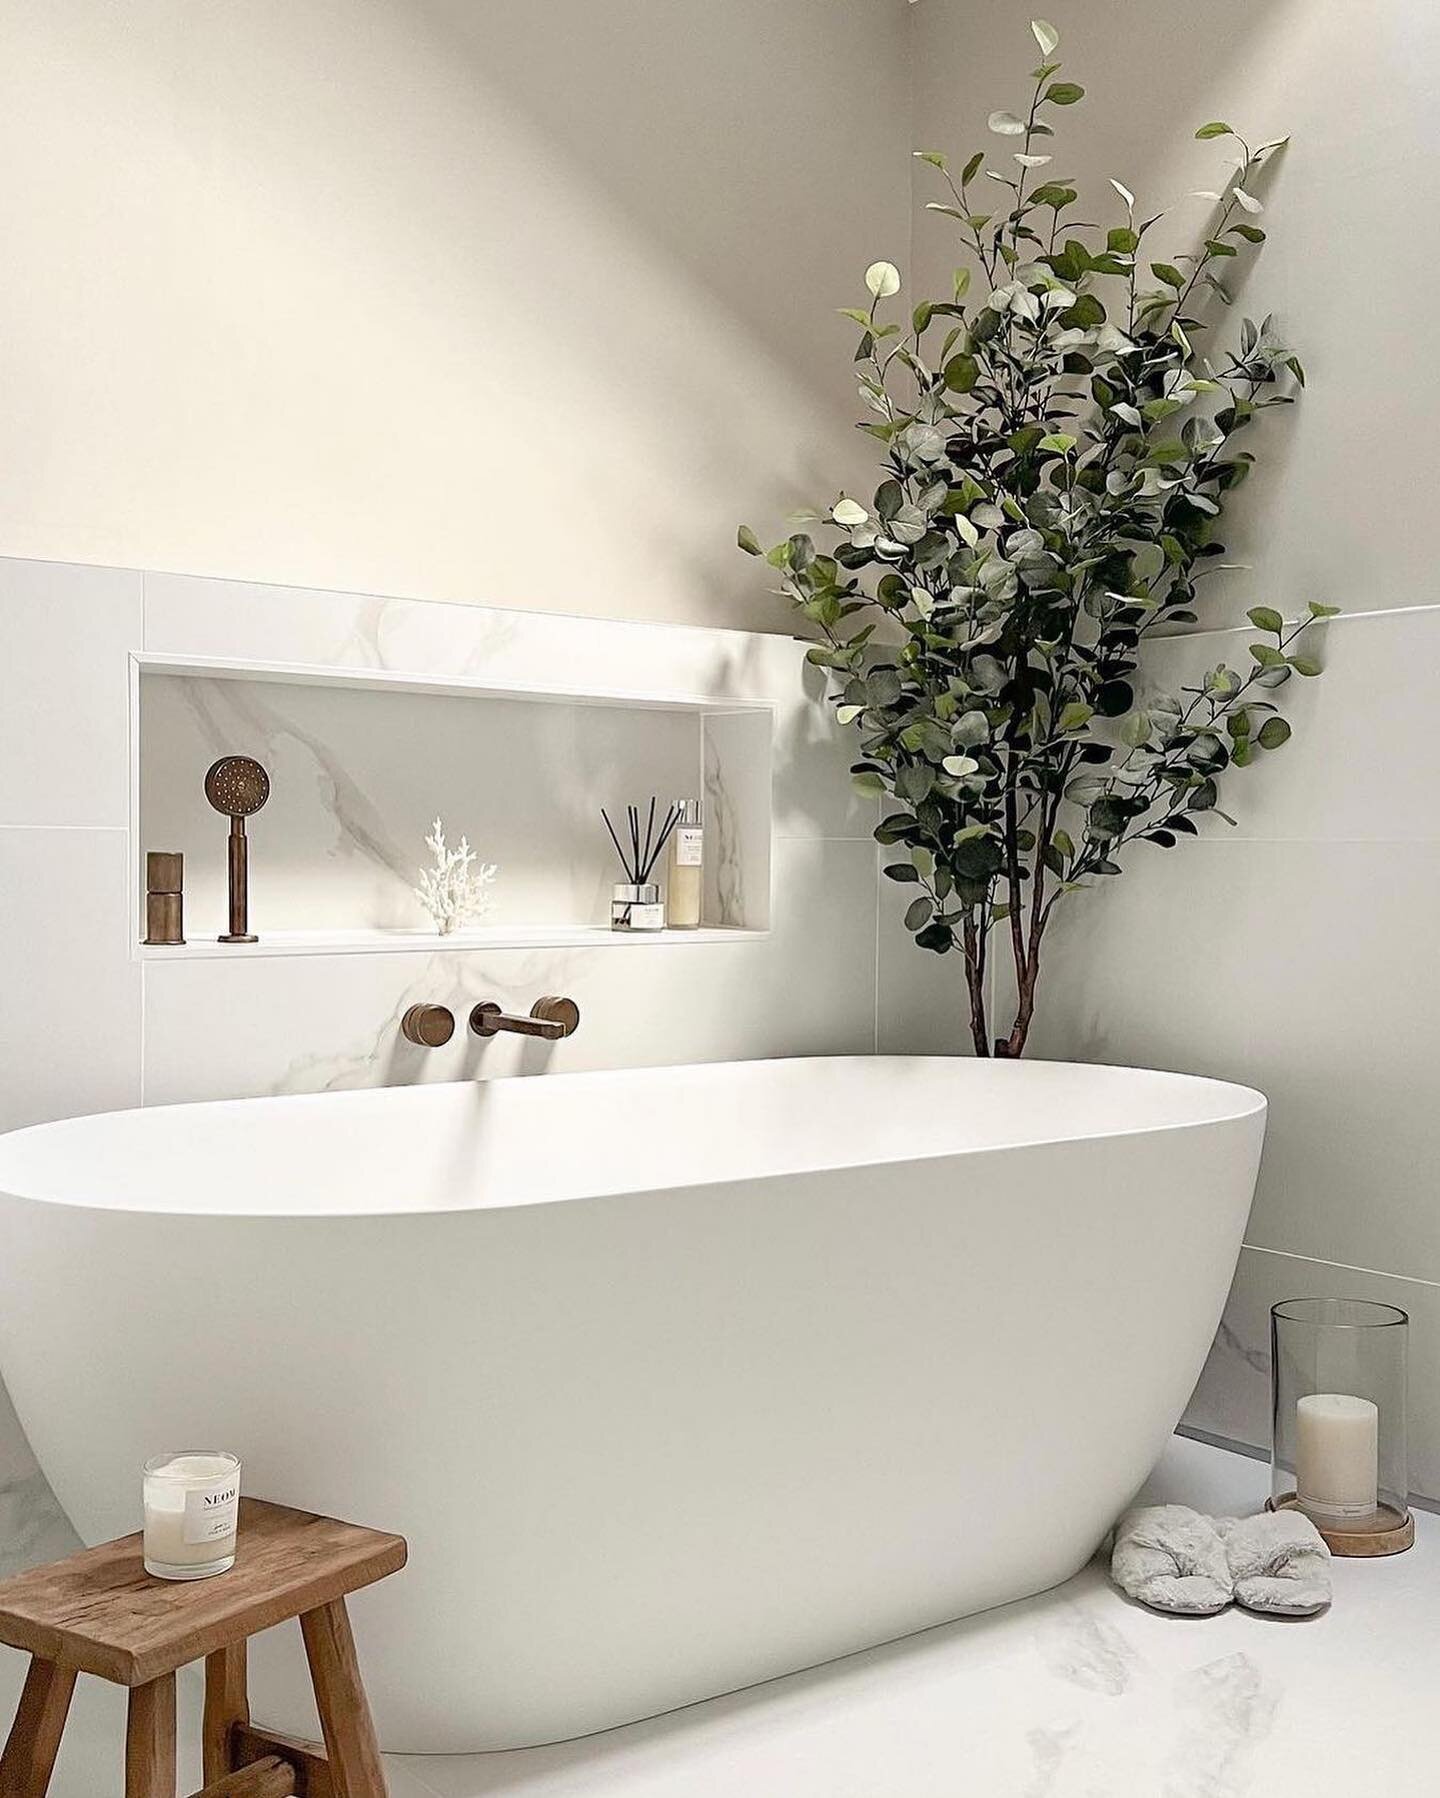 Indulge in opulence and tranquility within this lavish oasis. Immerse yourself in pure bliss as you unwind and disconnect. Our exquisite freestanding bathtub steals the show, accompanied by the exquisite craftsmanship of our Engineer Collection taps 